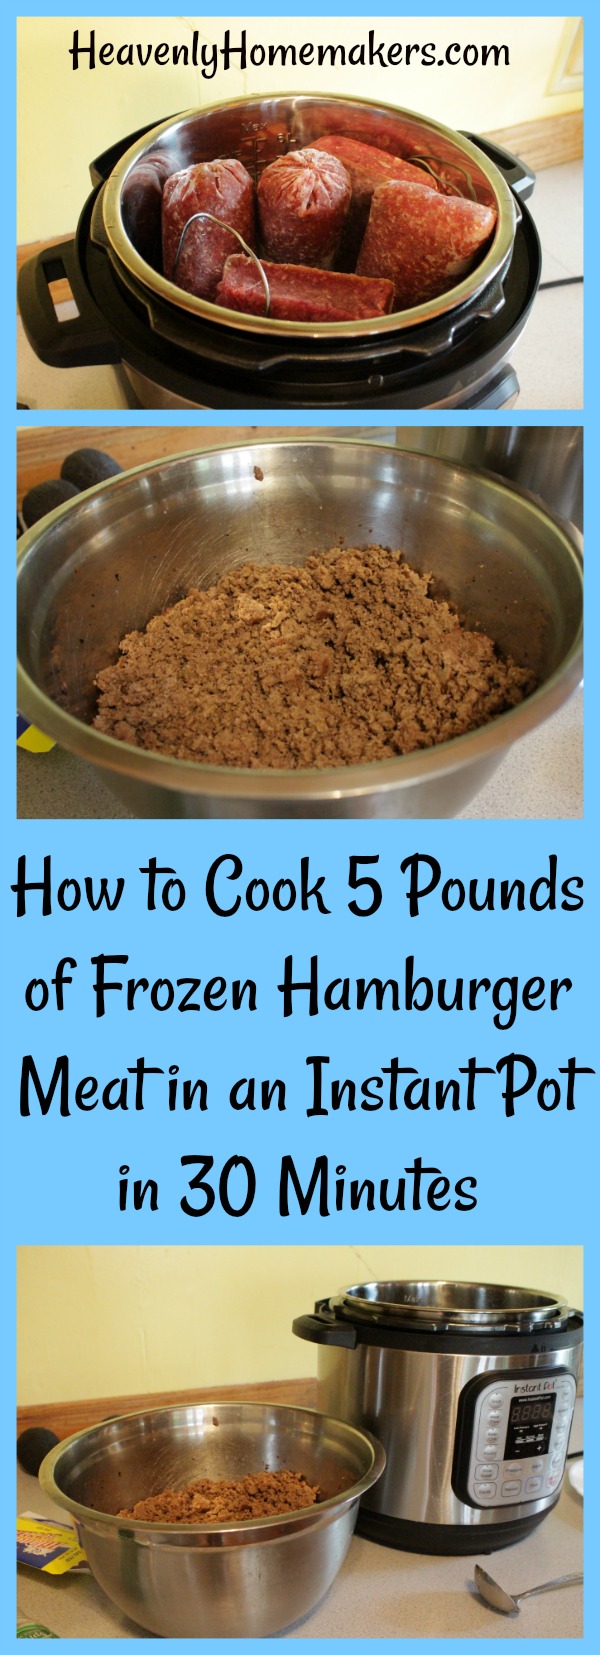 How to Cook 5 Pounds of Frozen Hamburger in an Instant Pot